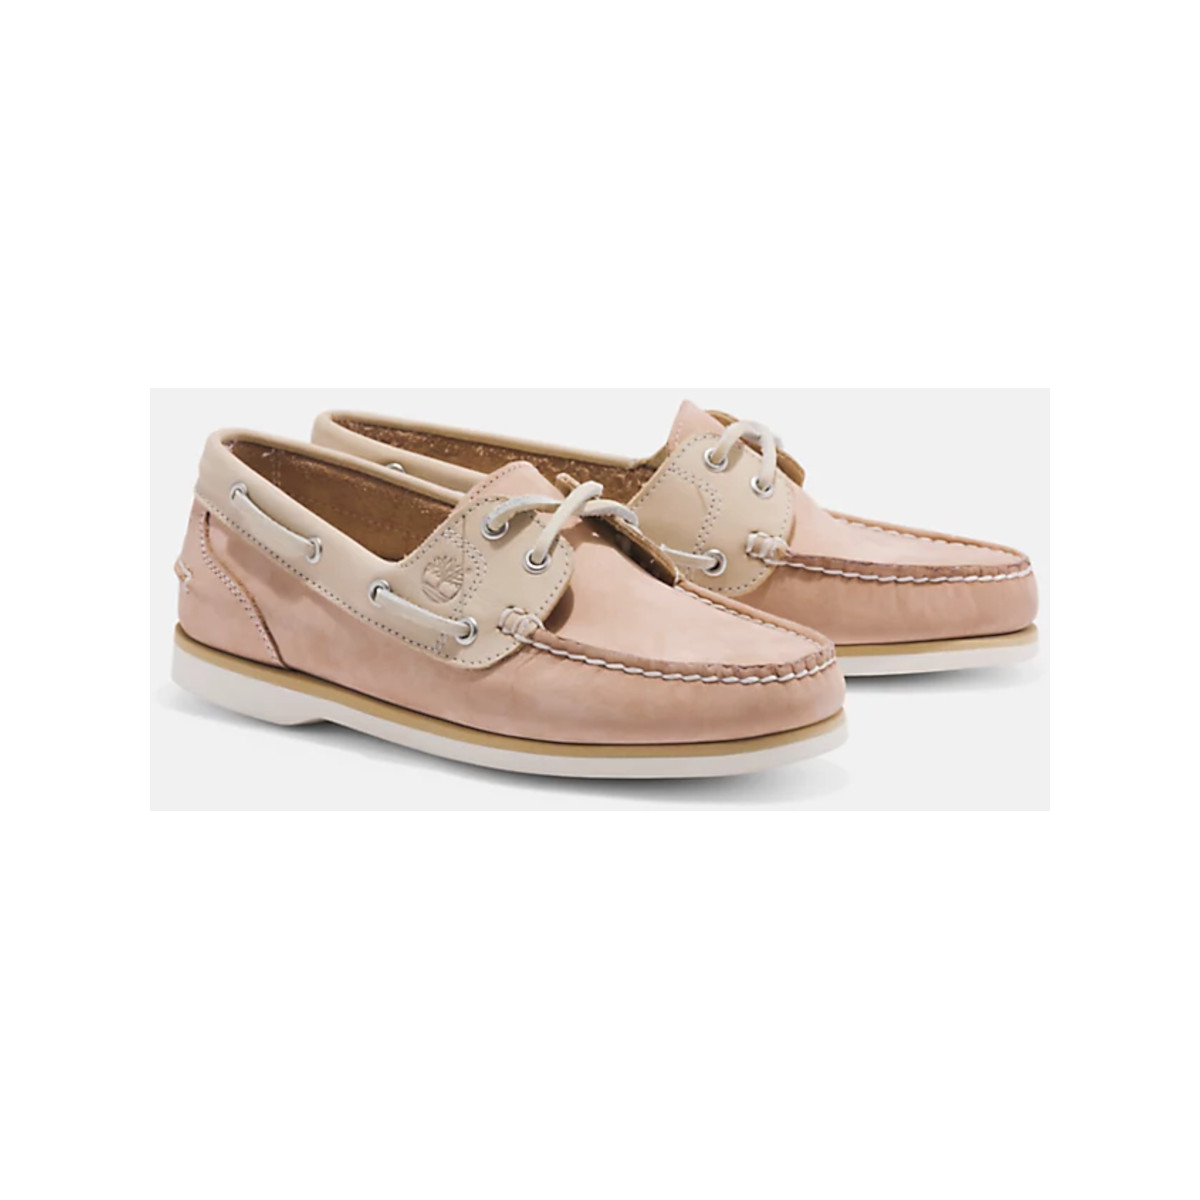 Timberland Classic Boat chaussure bateau femme - beige clair, pointure 38,5